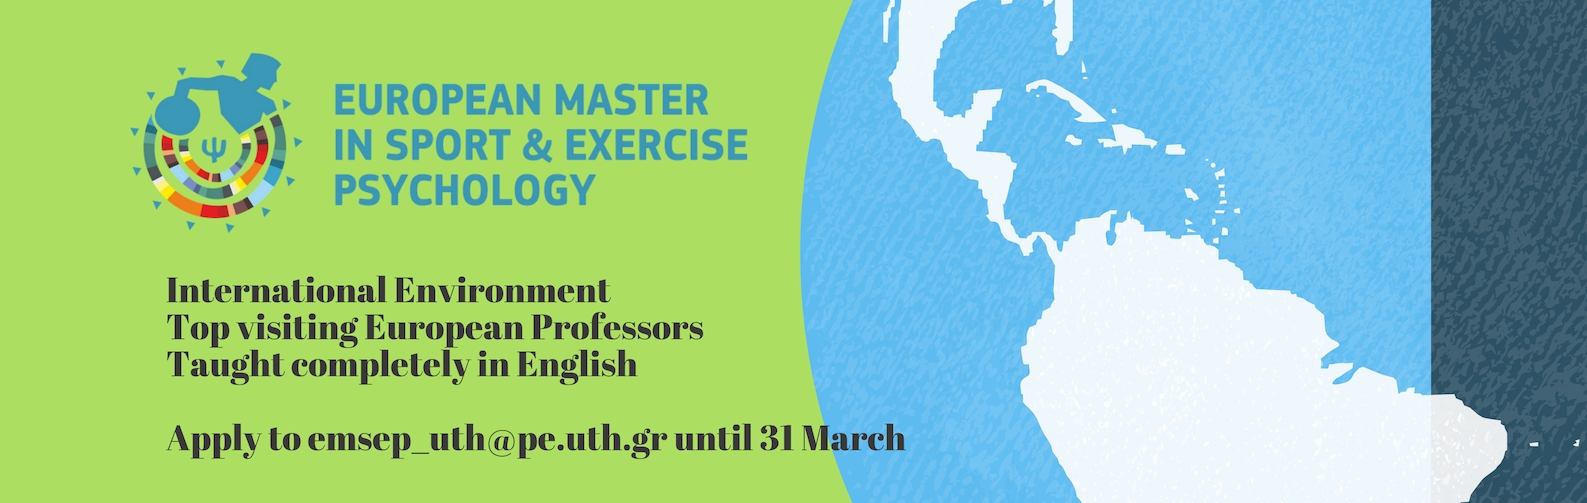 European Master in Sport & Exercise Psychology: Application period is now open!